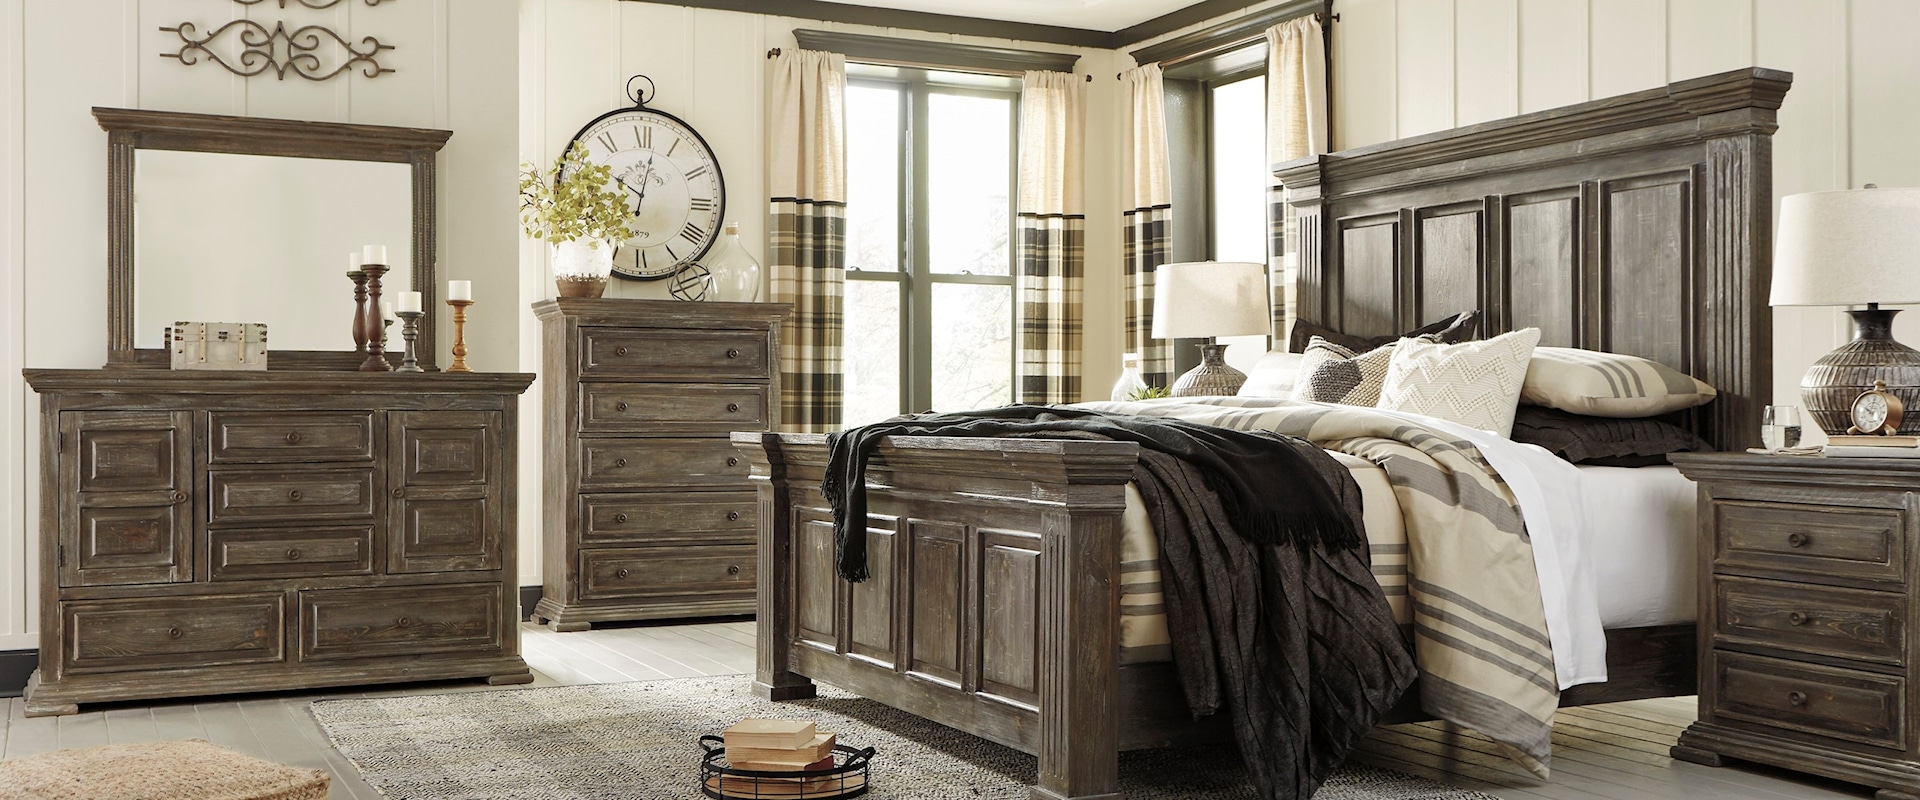 Mansion Rustic Dresser, Mirror, and 3 PC Queen Bed